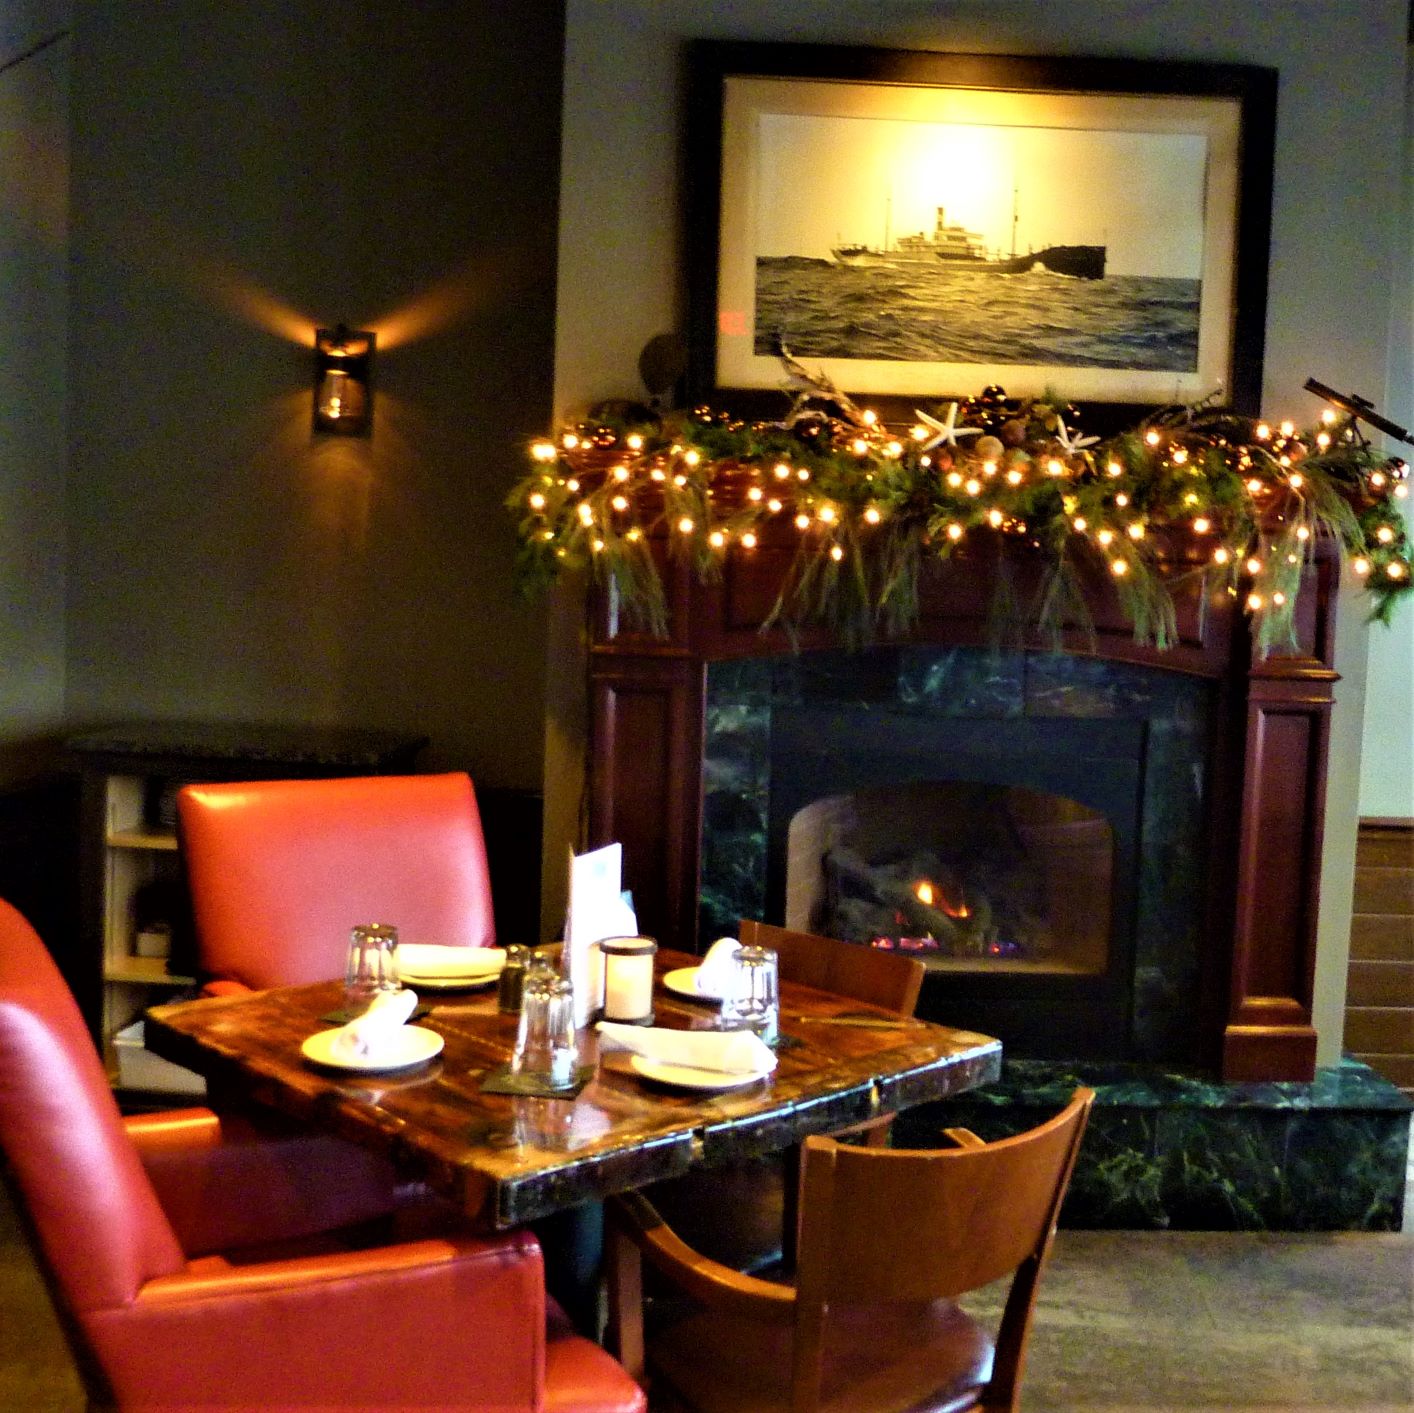 Dining area by the fireplace at DiMillo's On the Water in Portland, Maine.